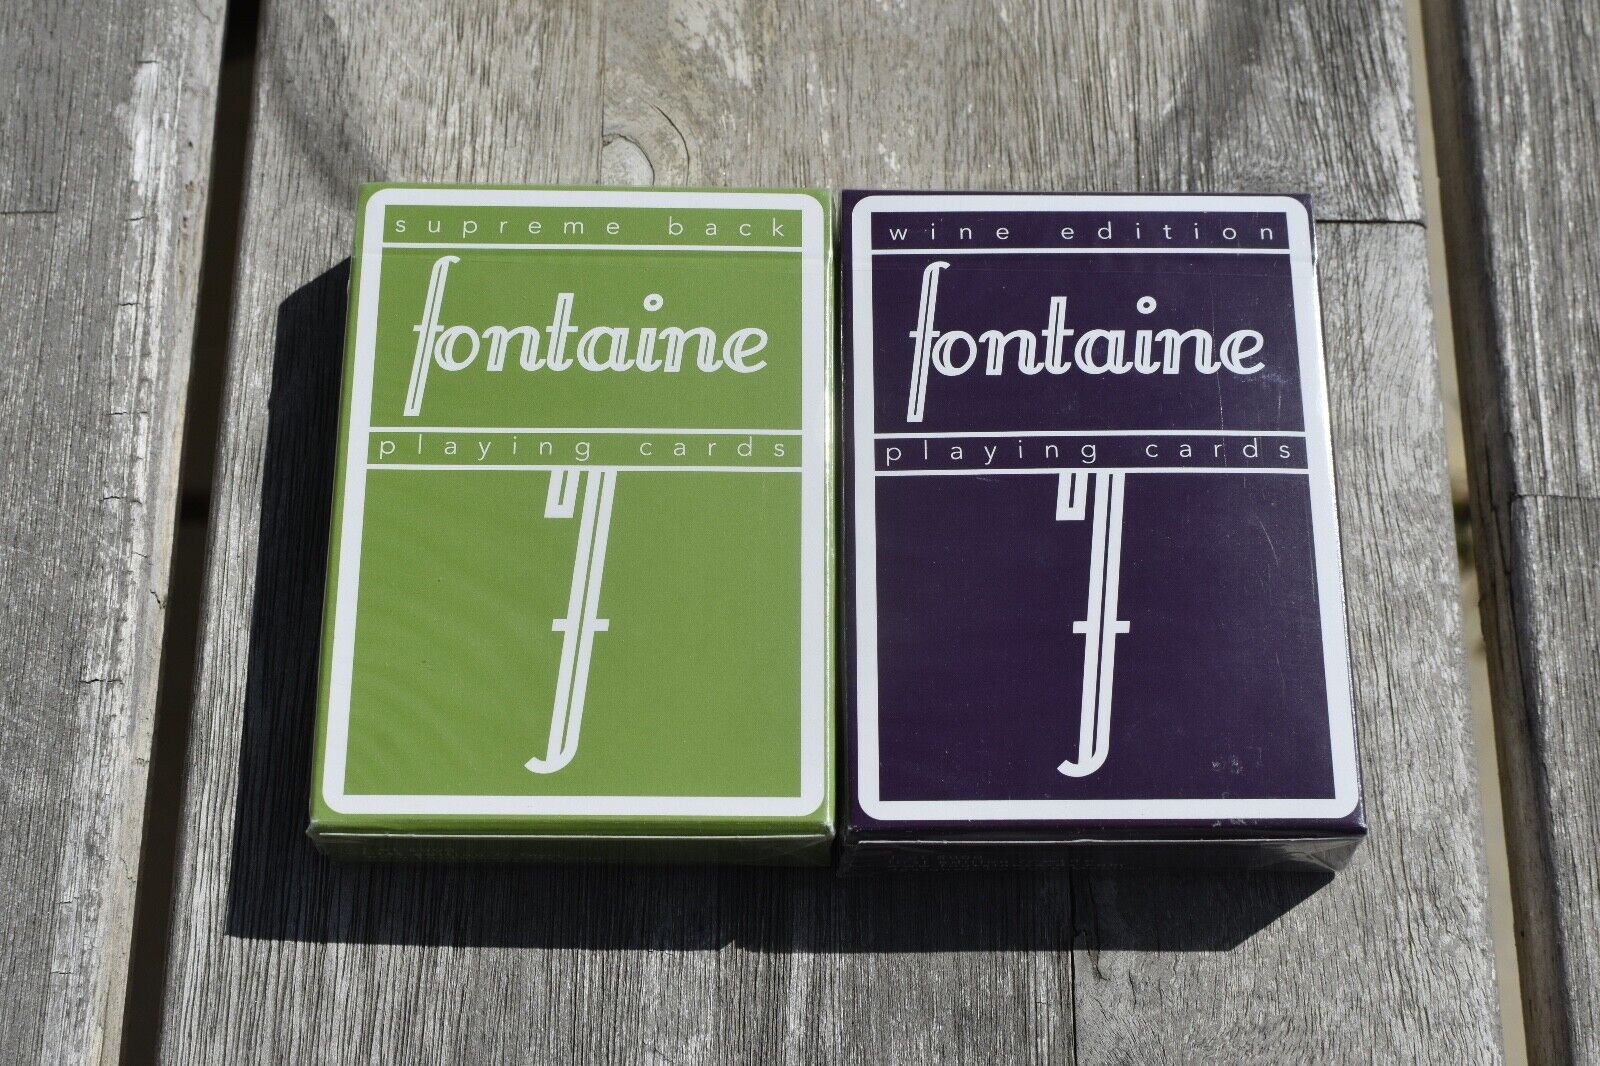 Set of 2 - Fontaine Cardistry Playing Cards - Supreme Back Green & Wine Edition 